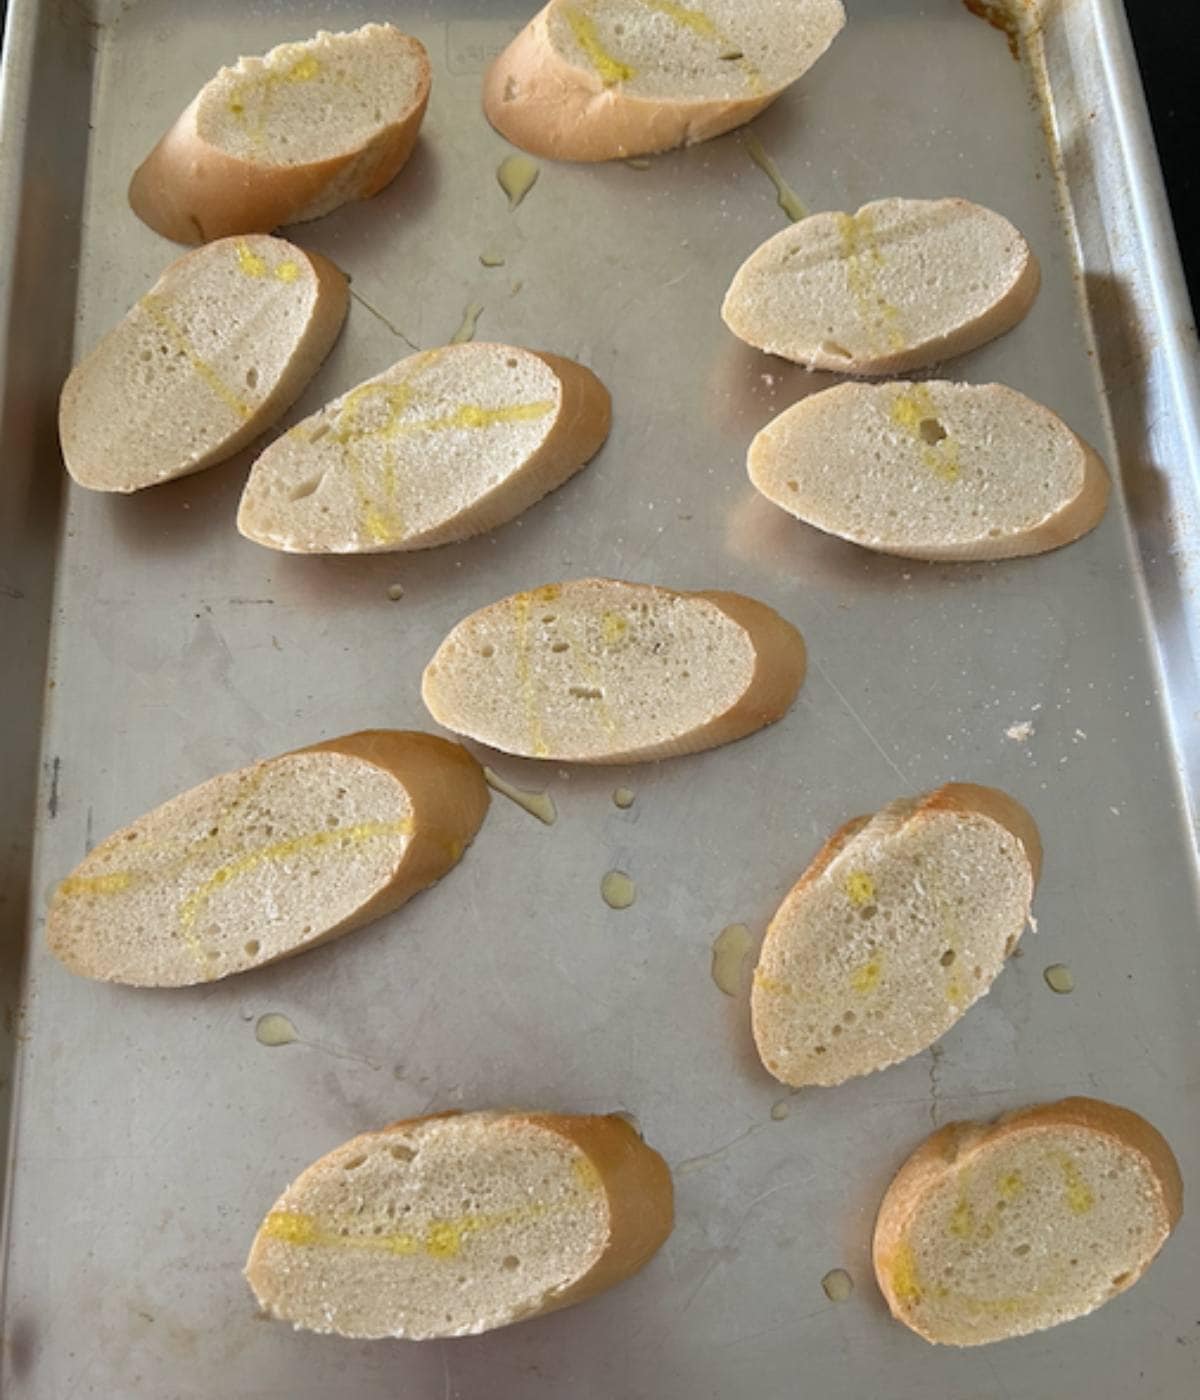 French bread sliced and ready to bake on cookie sheet.